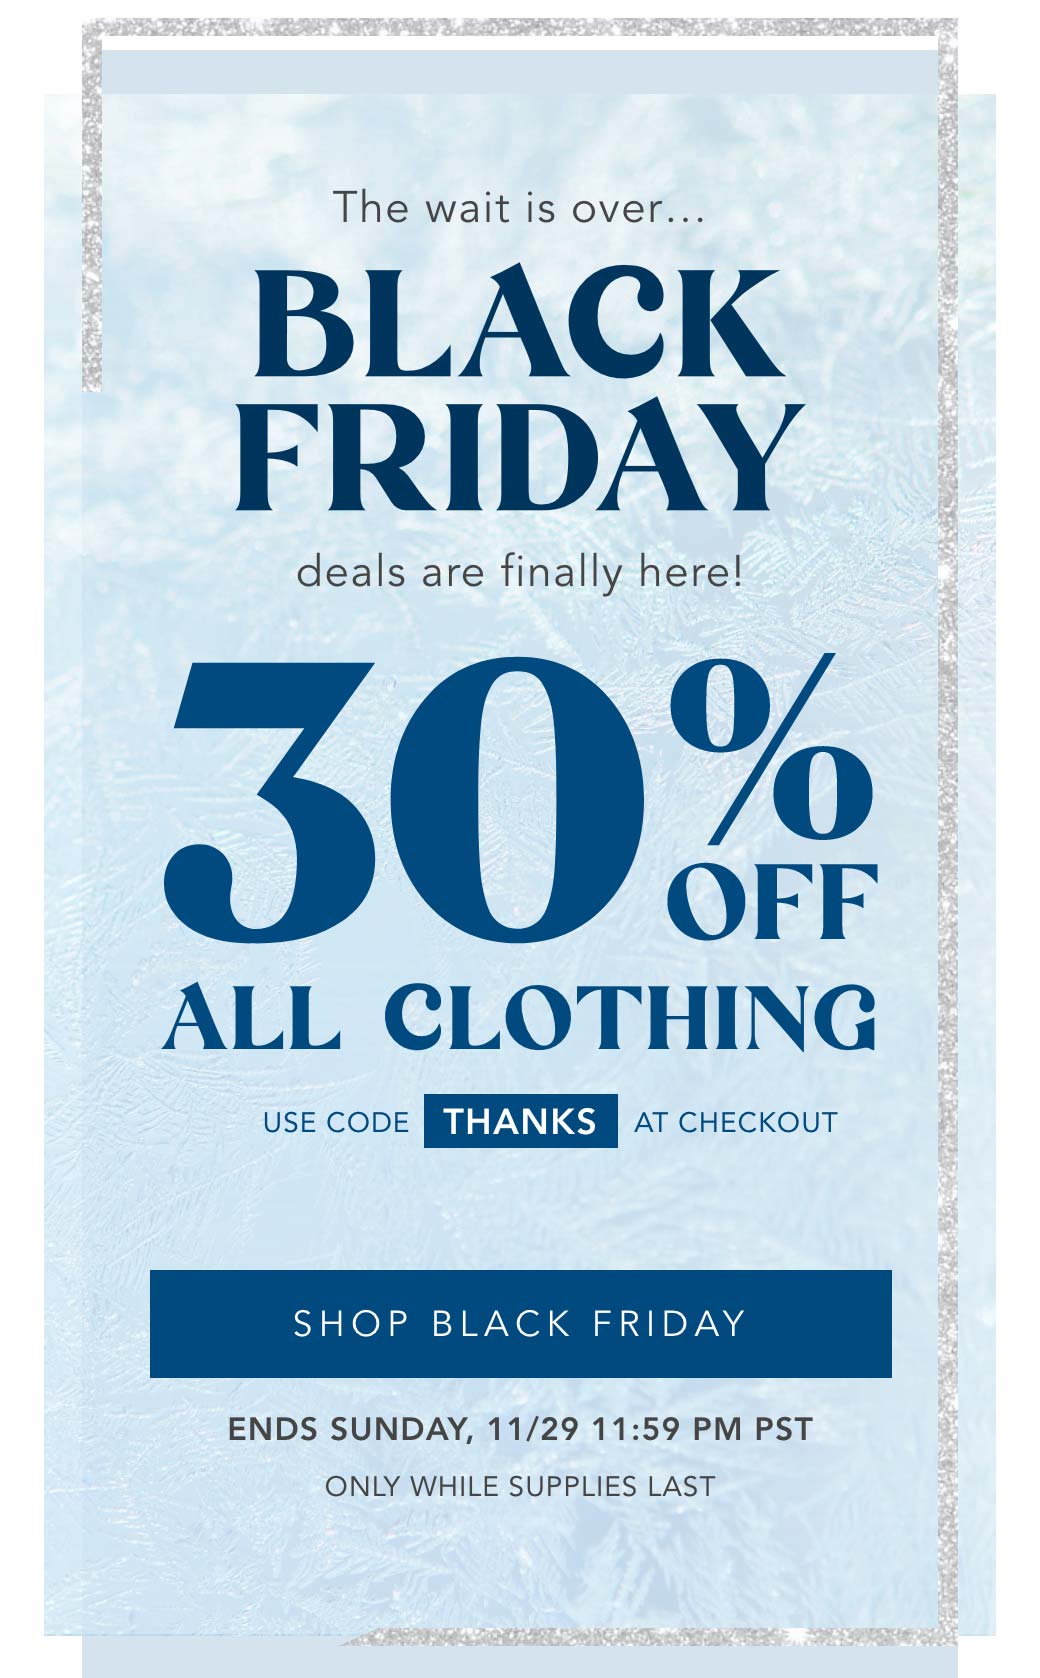 black friday - 30% off all clothing